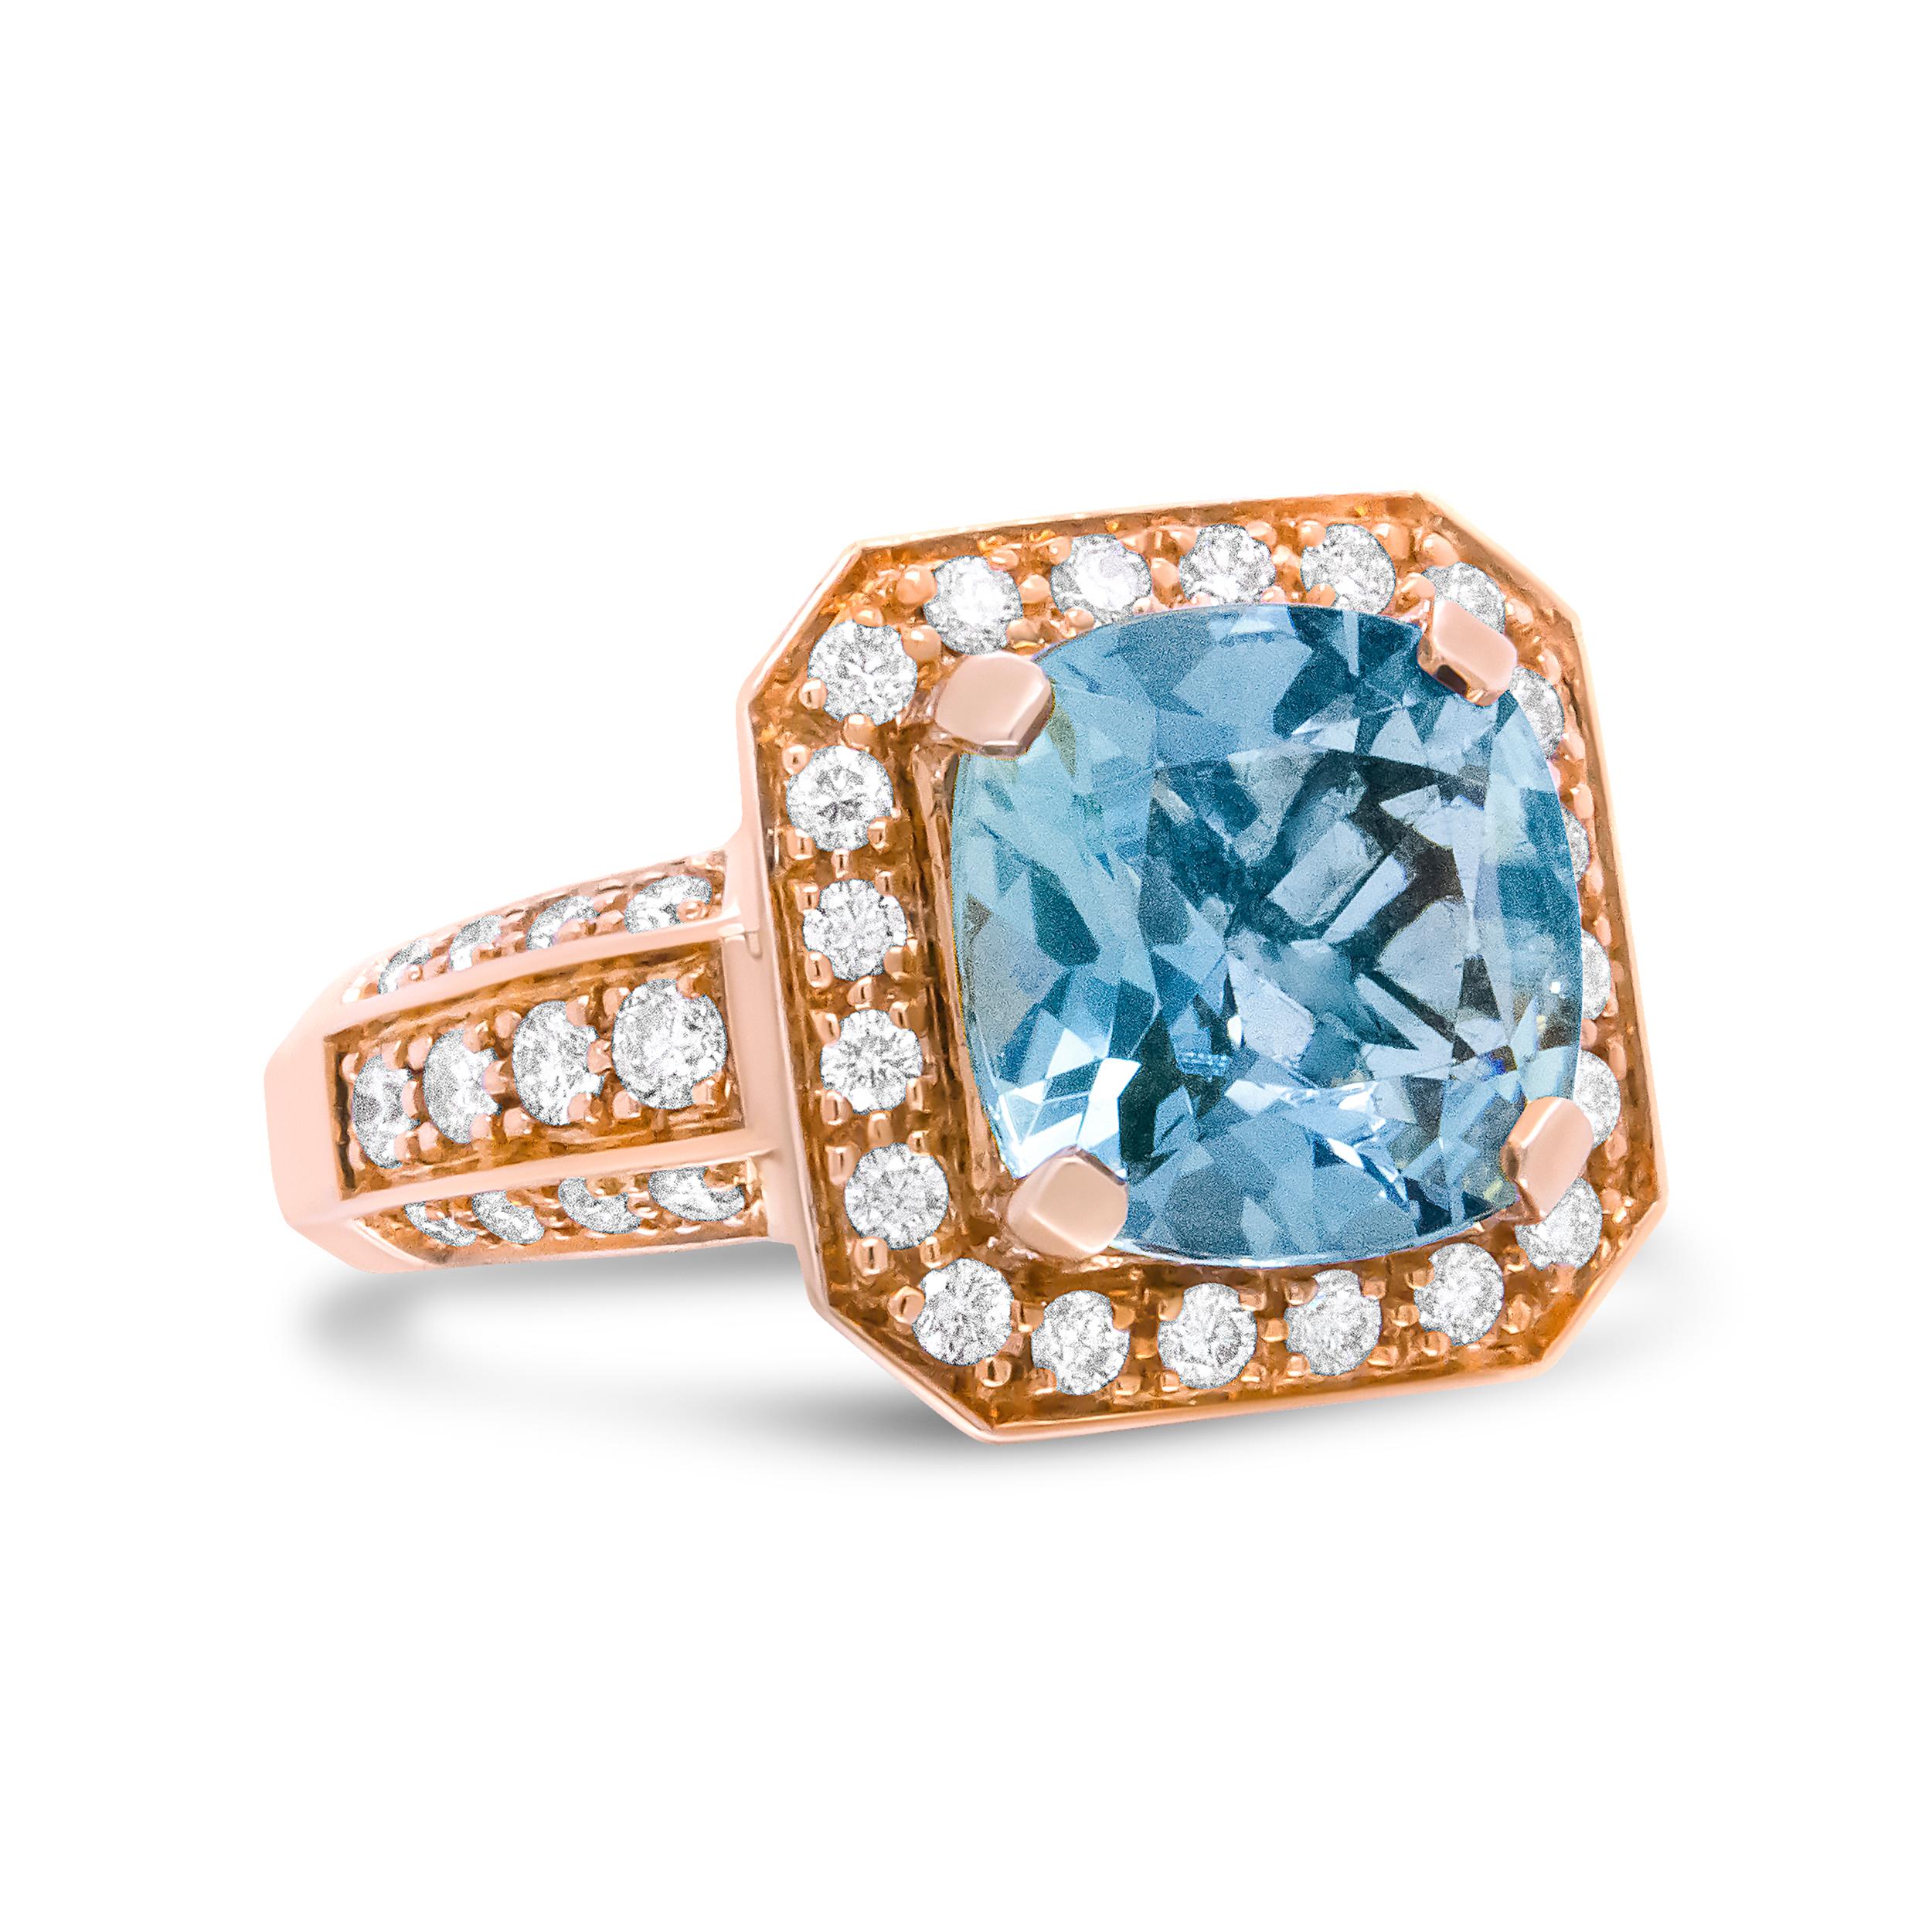 Natural white diamonds dance up on luxurious rose gold to flank a glamorous aquamarine cushion shaped gemstone. This beautiful blue stone is 10x10mm and sits as the central motif on this 18k rose gold ring. The total diamond weight of this piece is